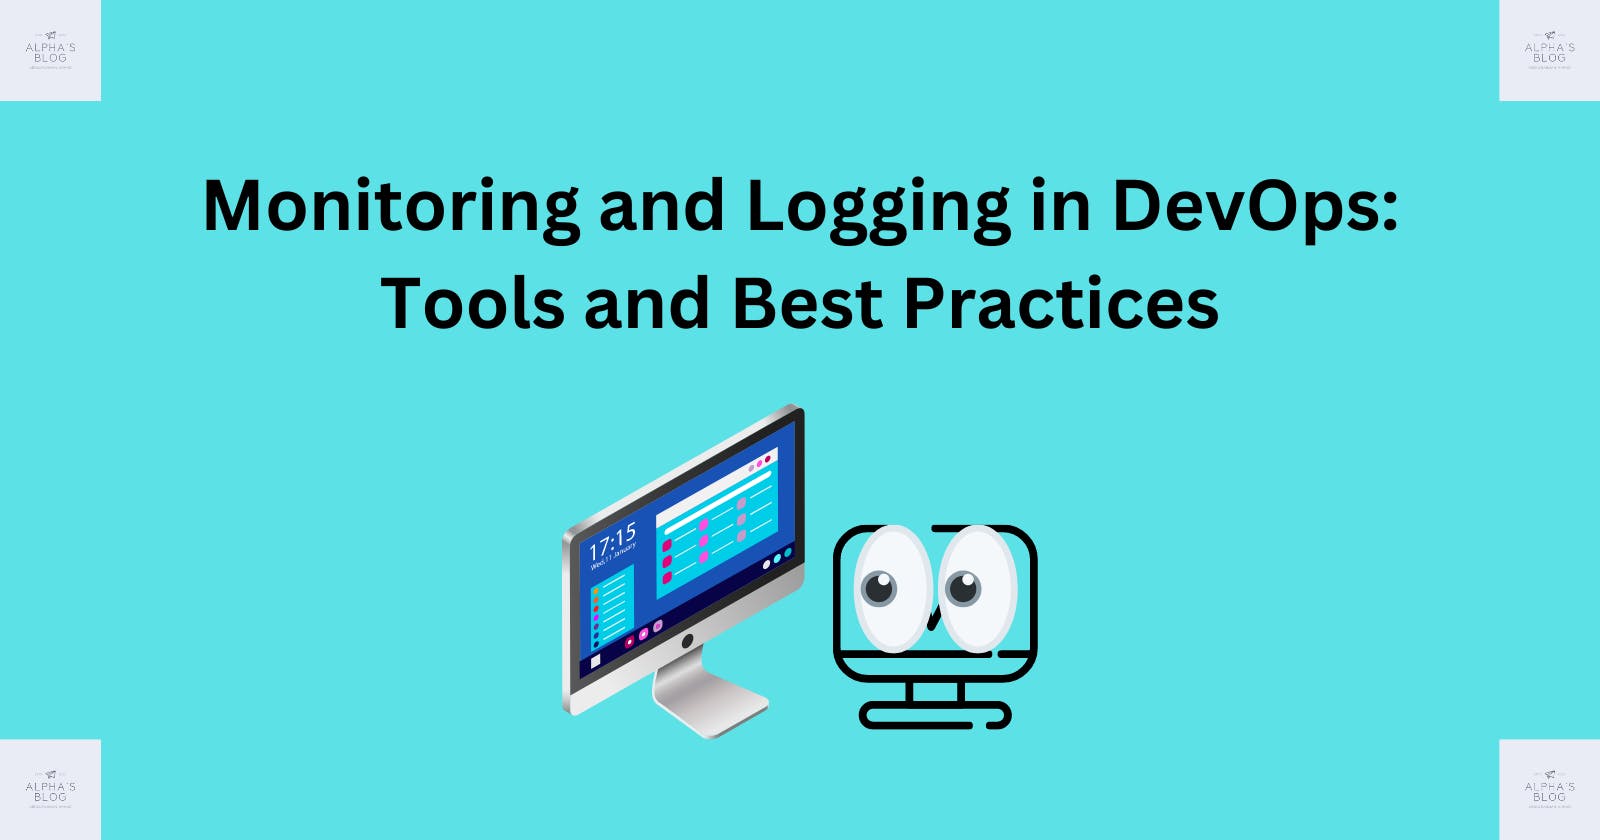 Monitoring and Logging in DevOps: Tools and Best Practices